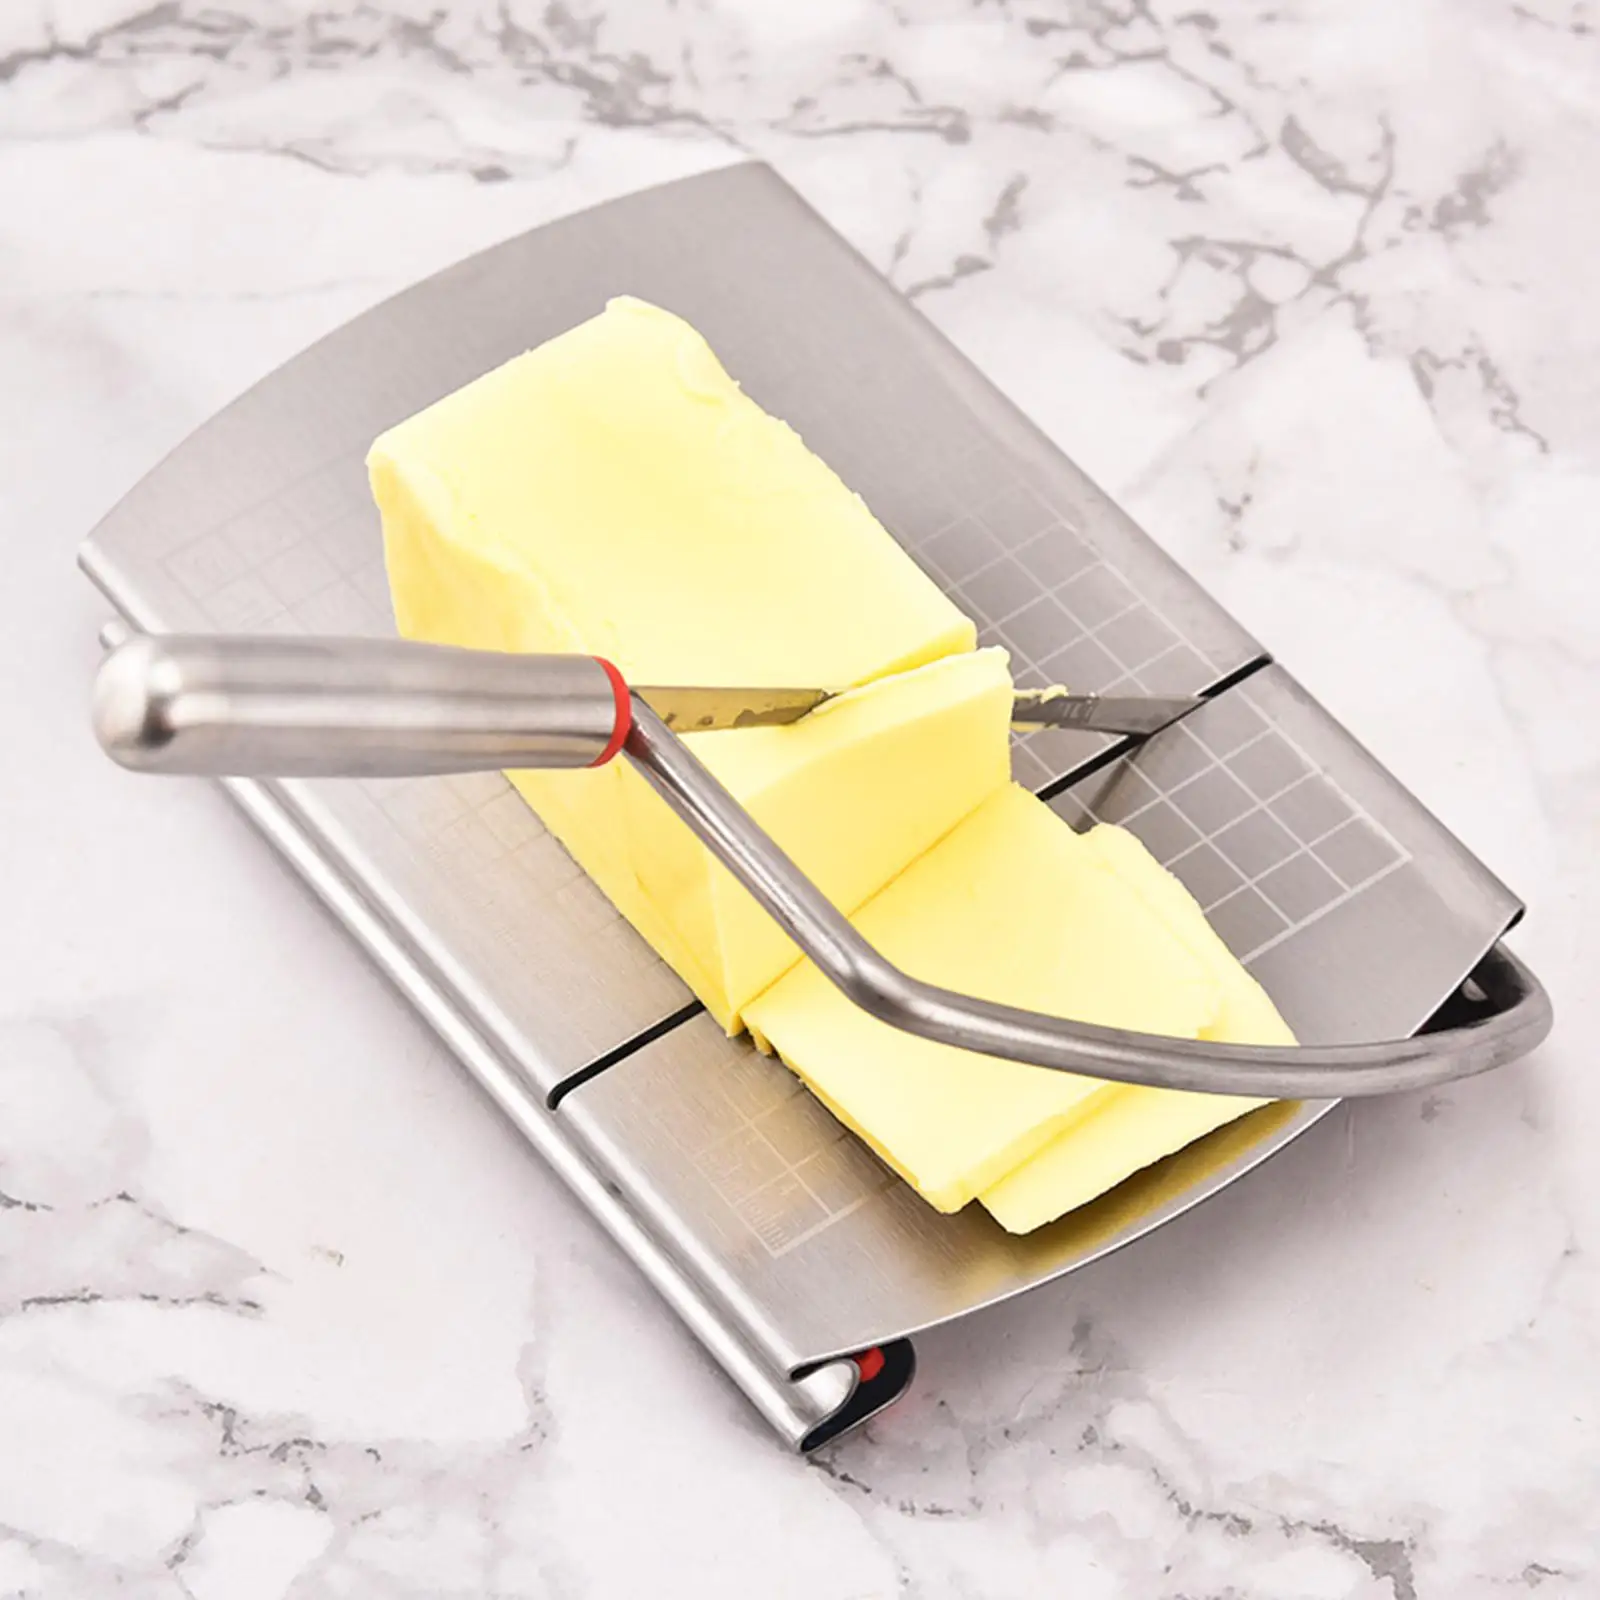 Cheese Slicer Heavy Duty Multifunctional Precise Scale Gift Kitchen Gadget Convenient Cheese Cutter for Bar Cafe Home Kitchen